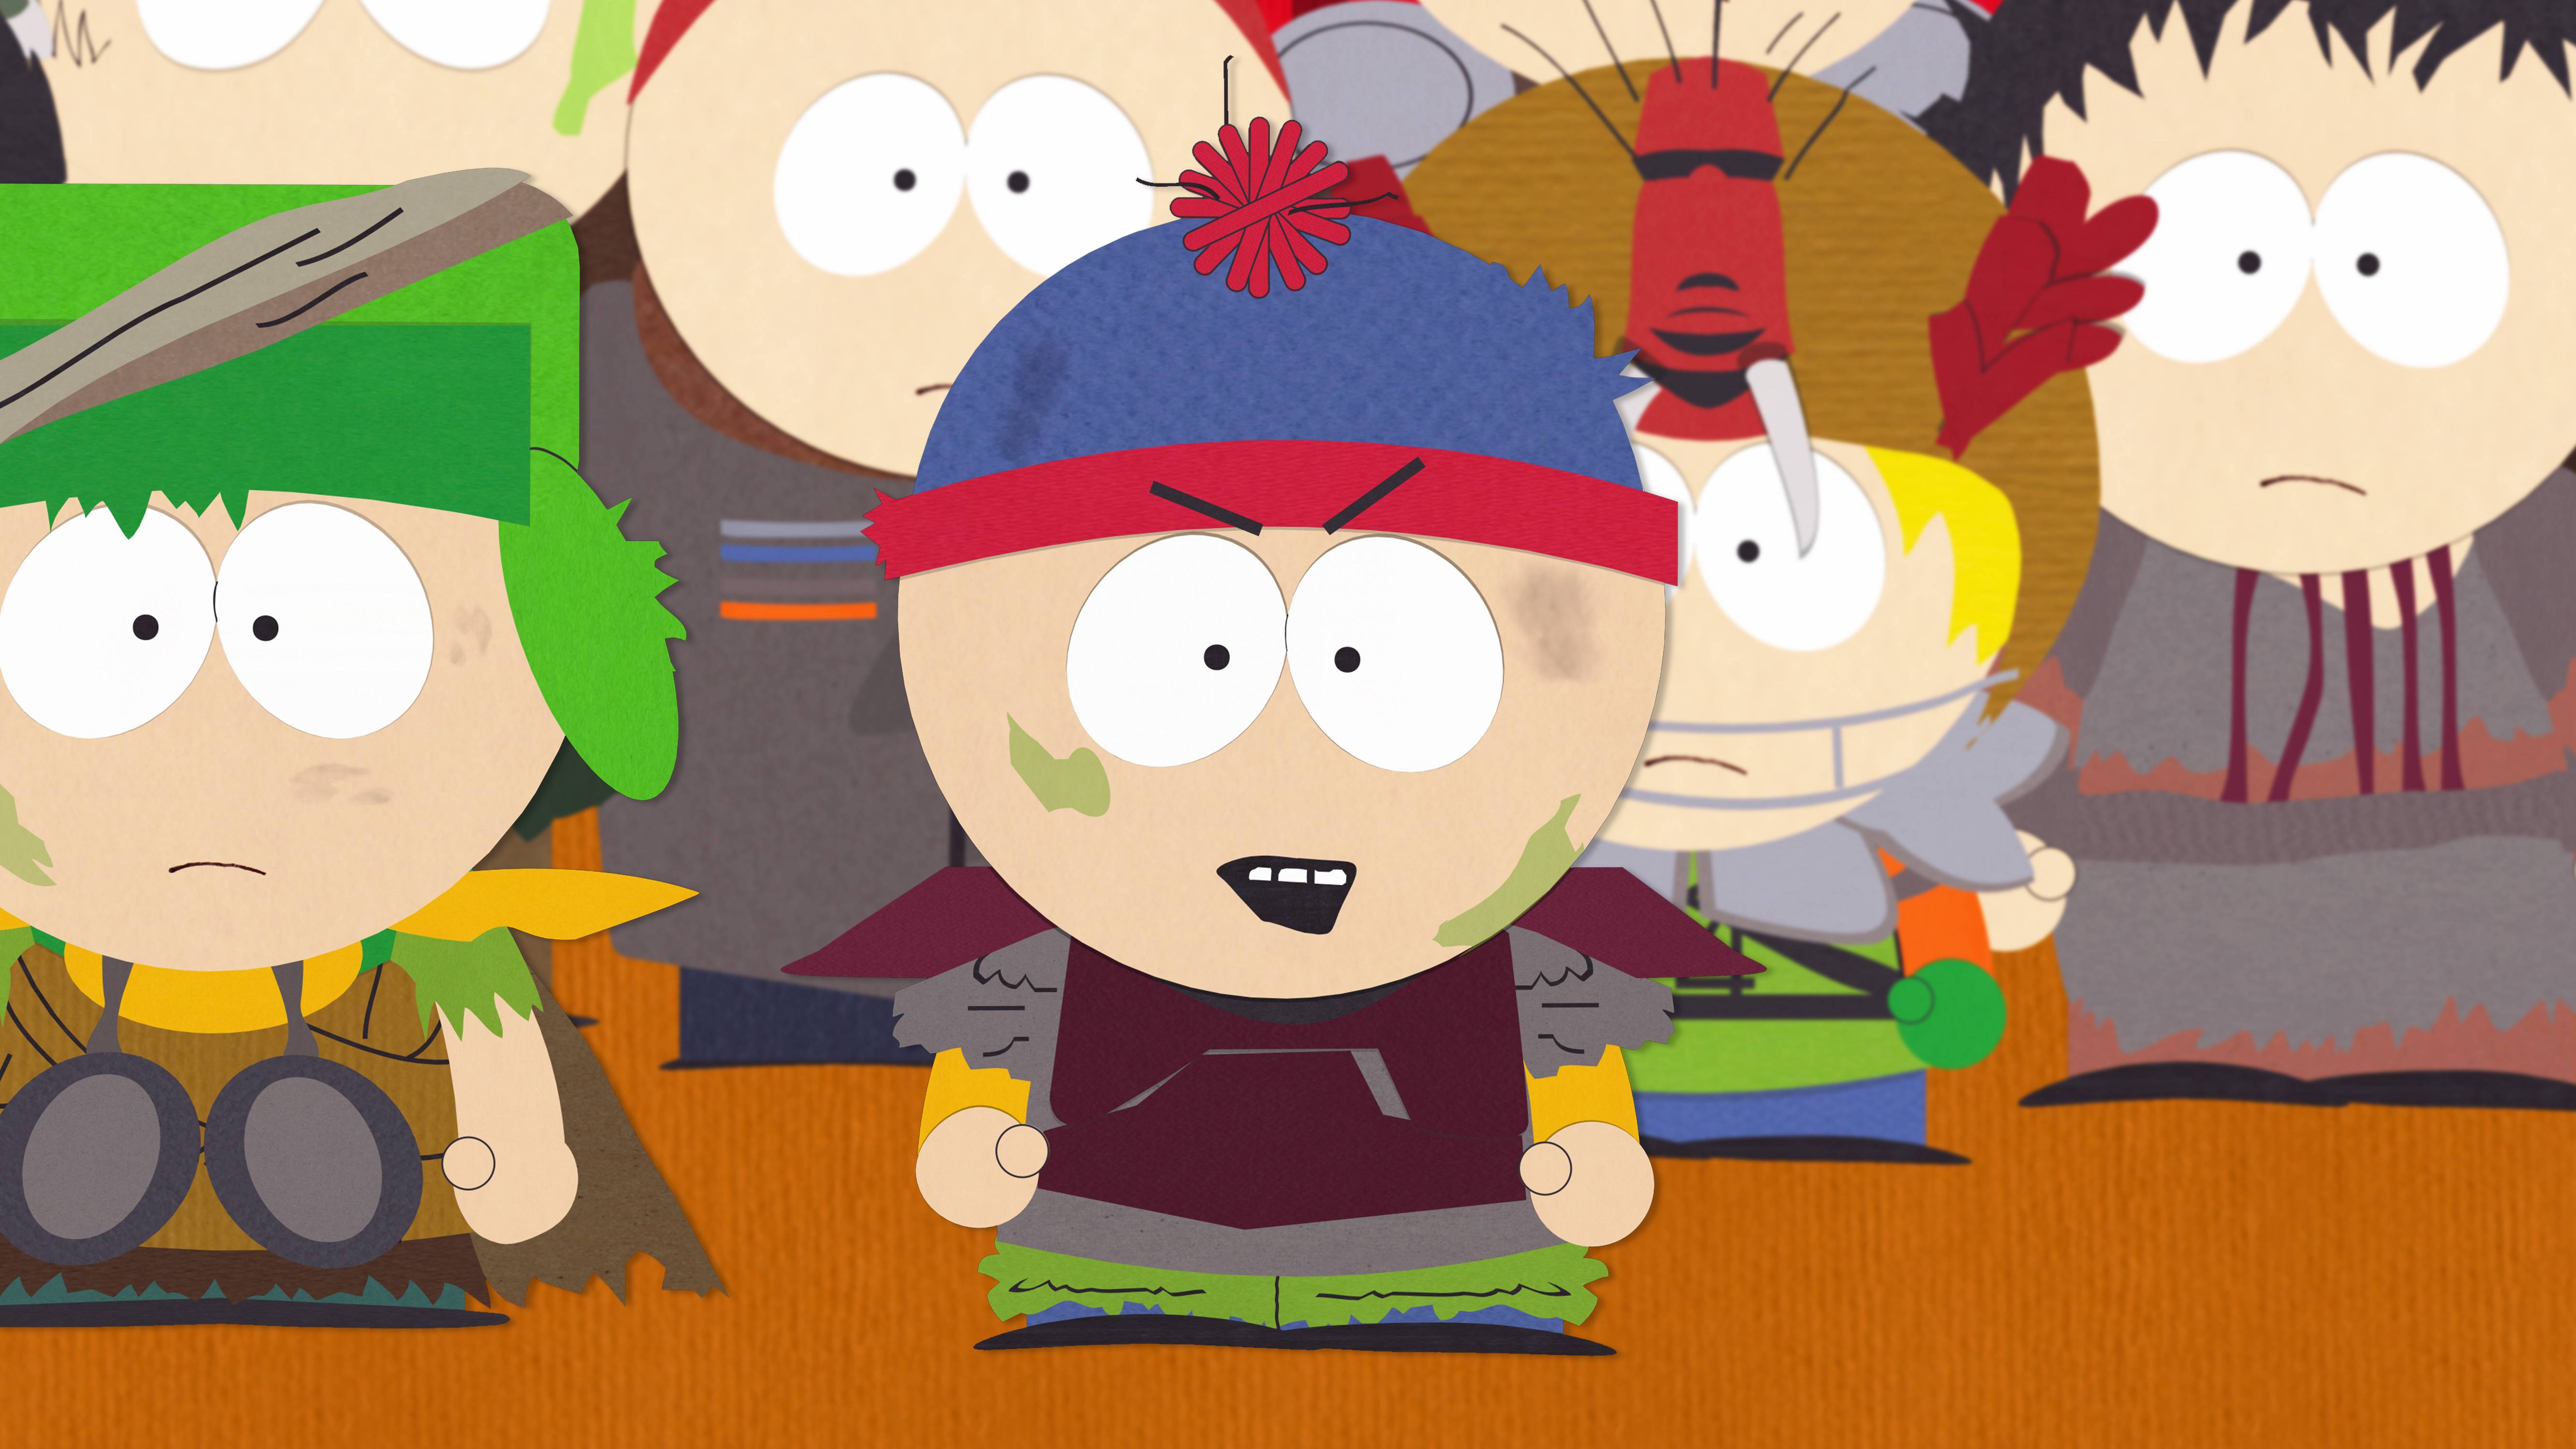 South Park - Satirical Animated TV Show, Watch Free Episodes